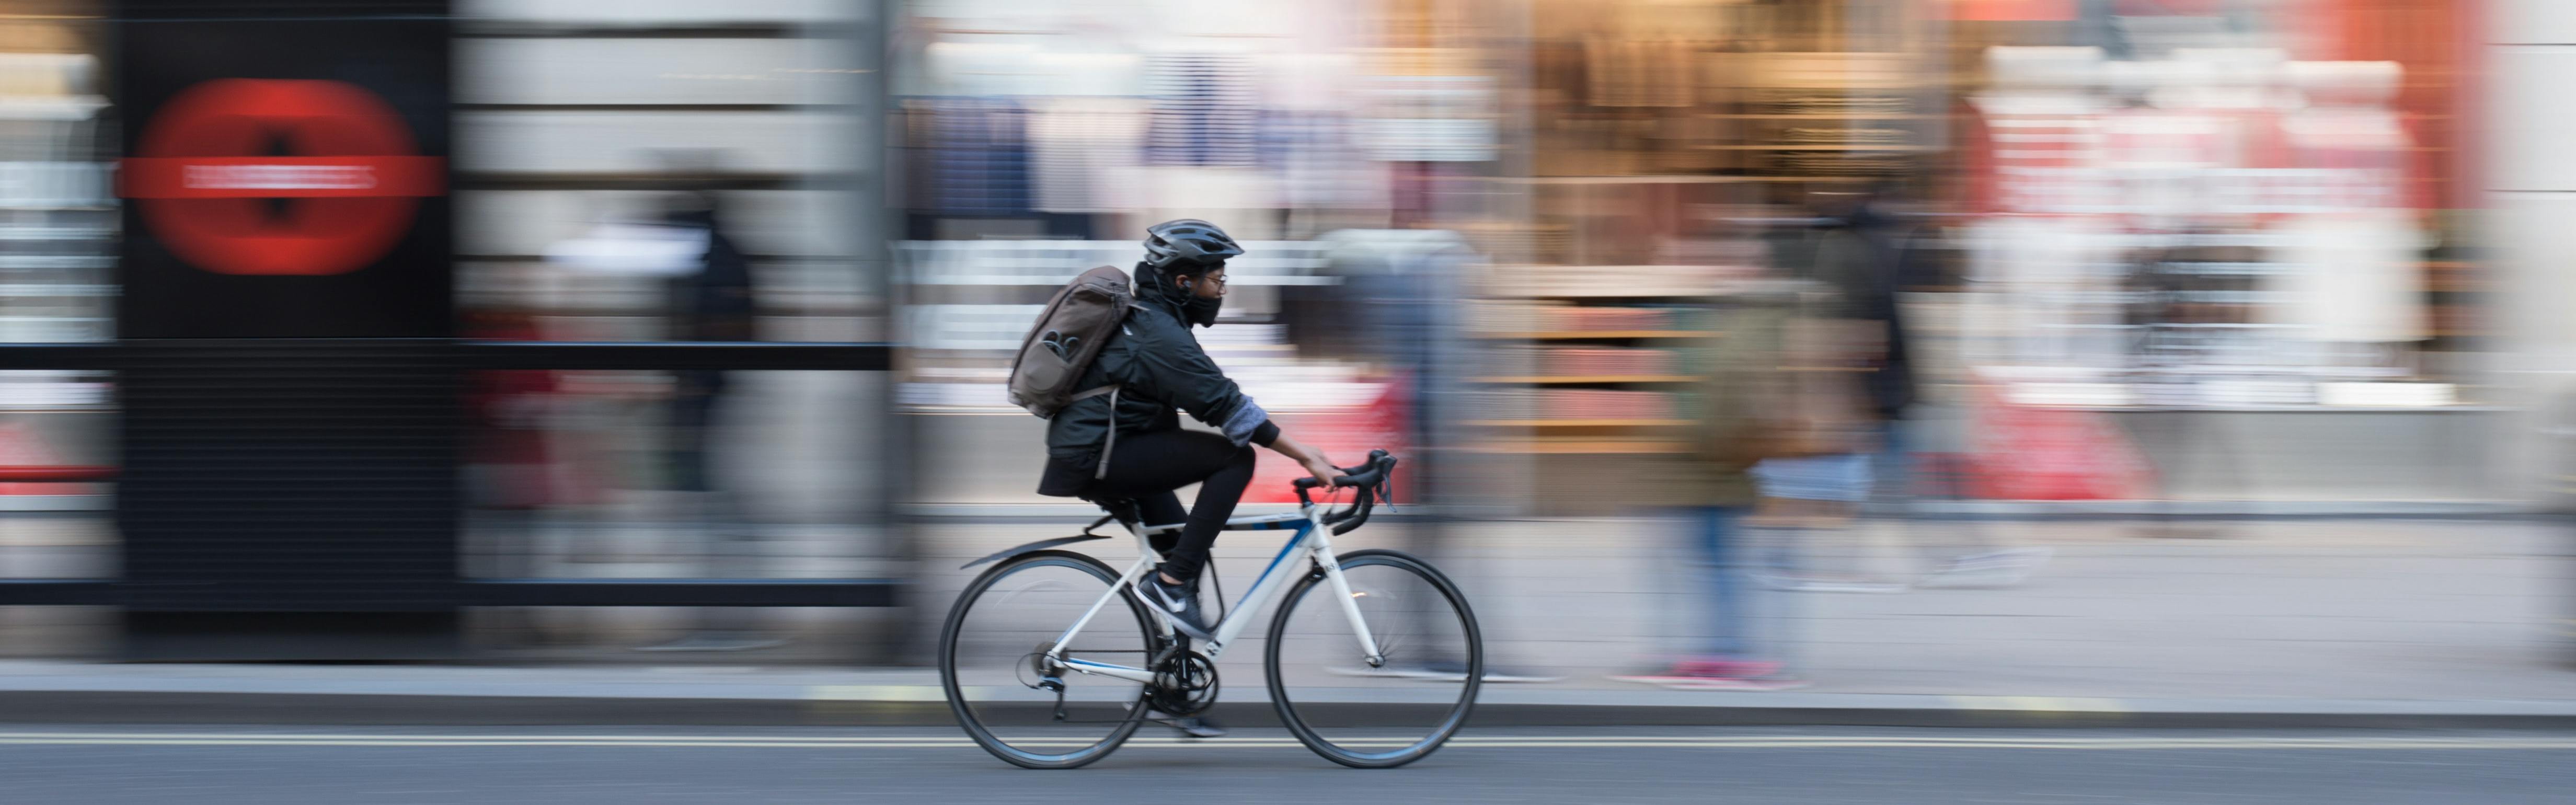 The image is focused on a biker in the middle of the frame. The city scene behind him is blurred. 